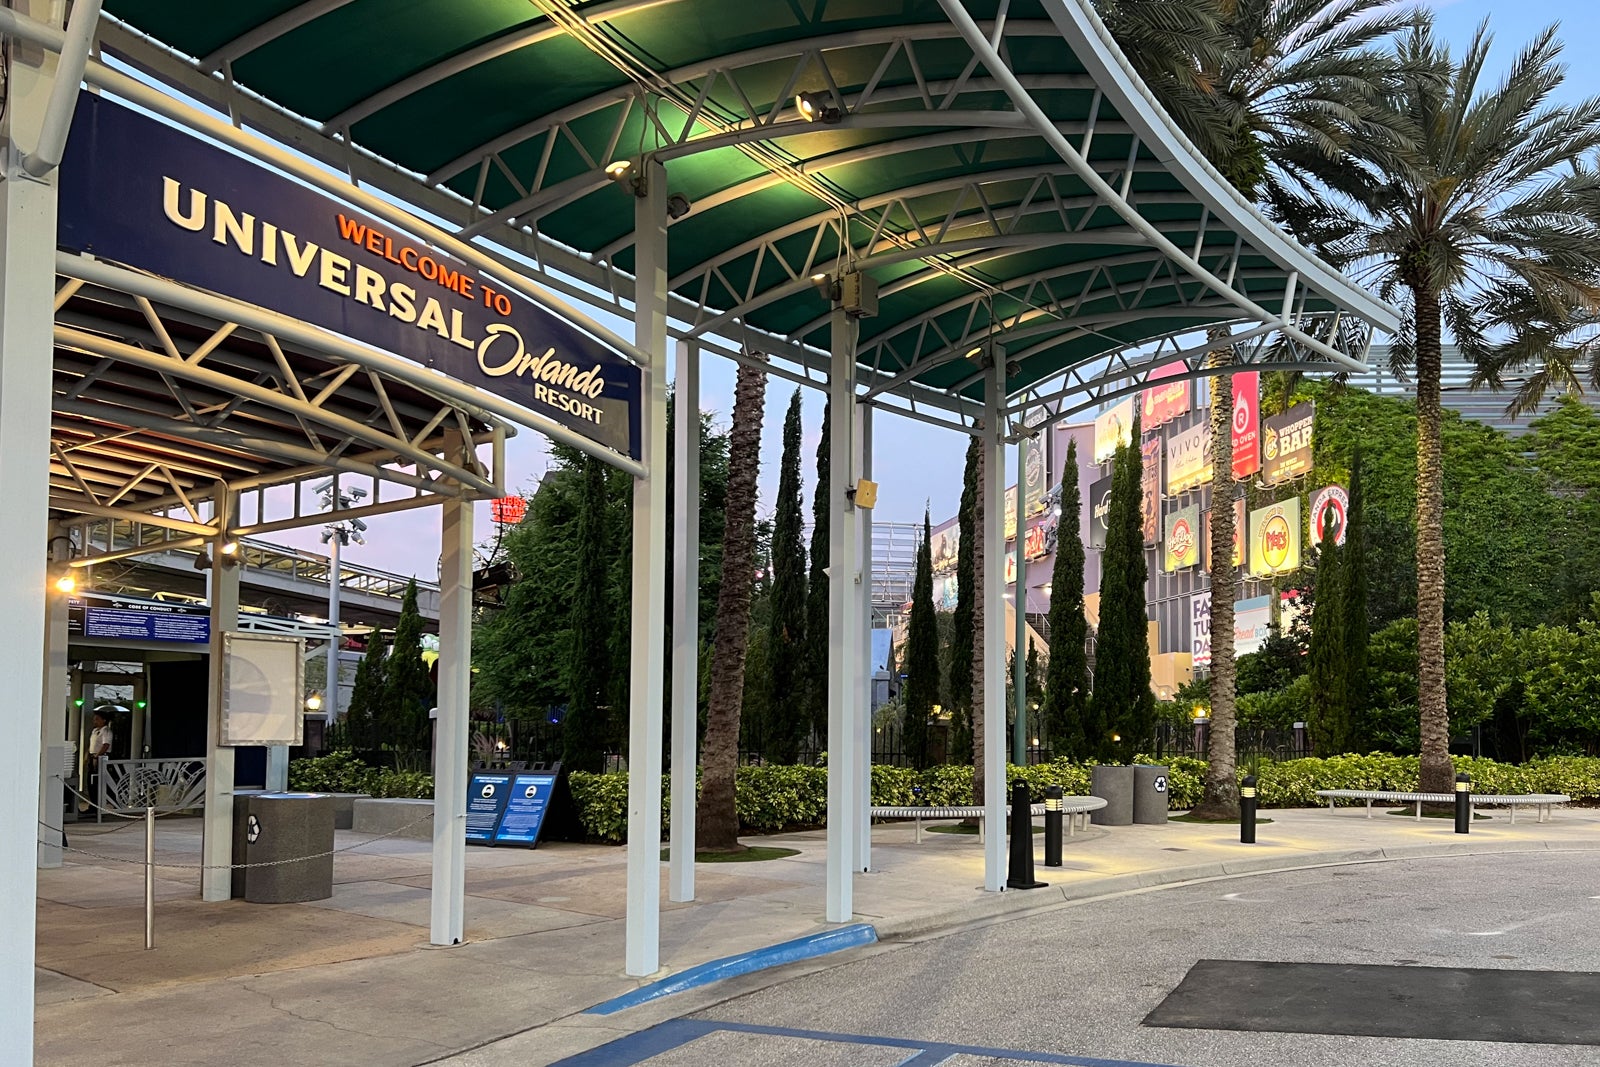 How Much is Parking at Universal Orlando? 